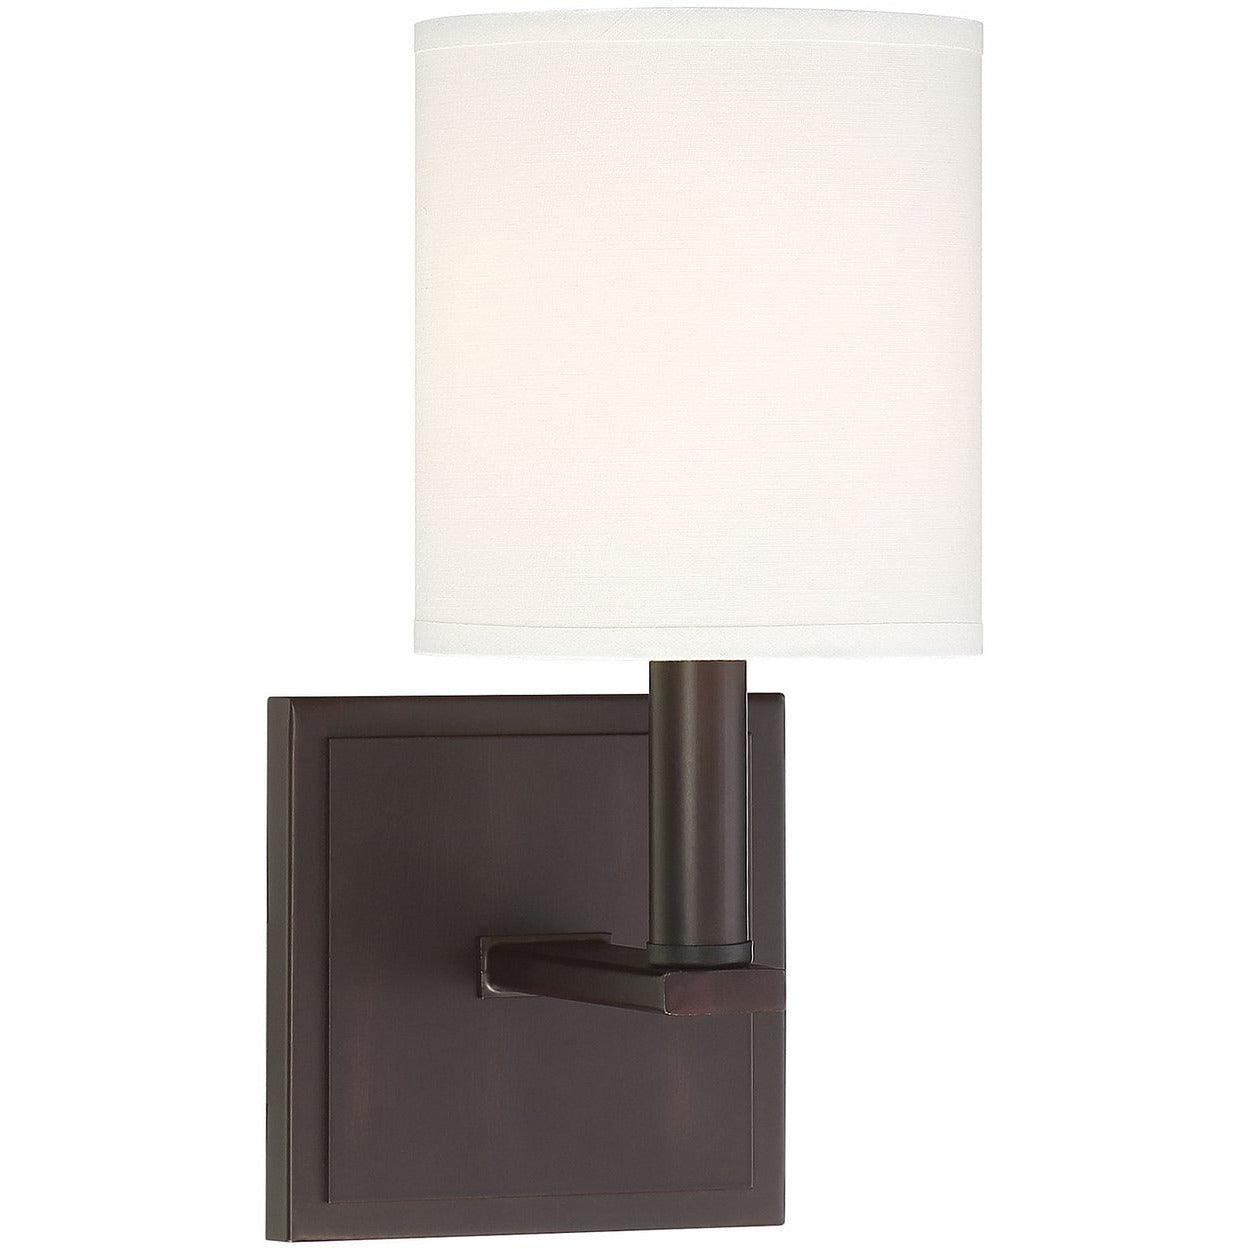 Savoy House - Waverly One Light Wall Sconce - 9-1200-1-13 | Montreal Lighting & Hardware